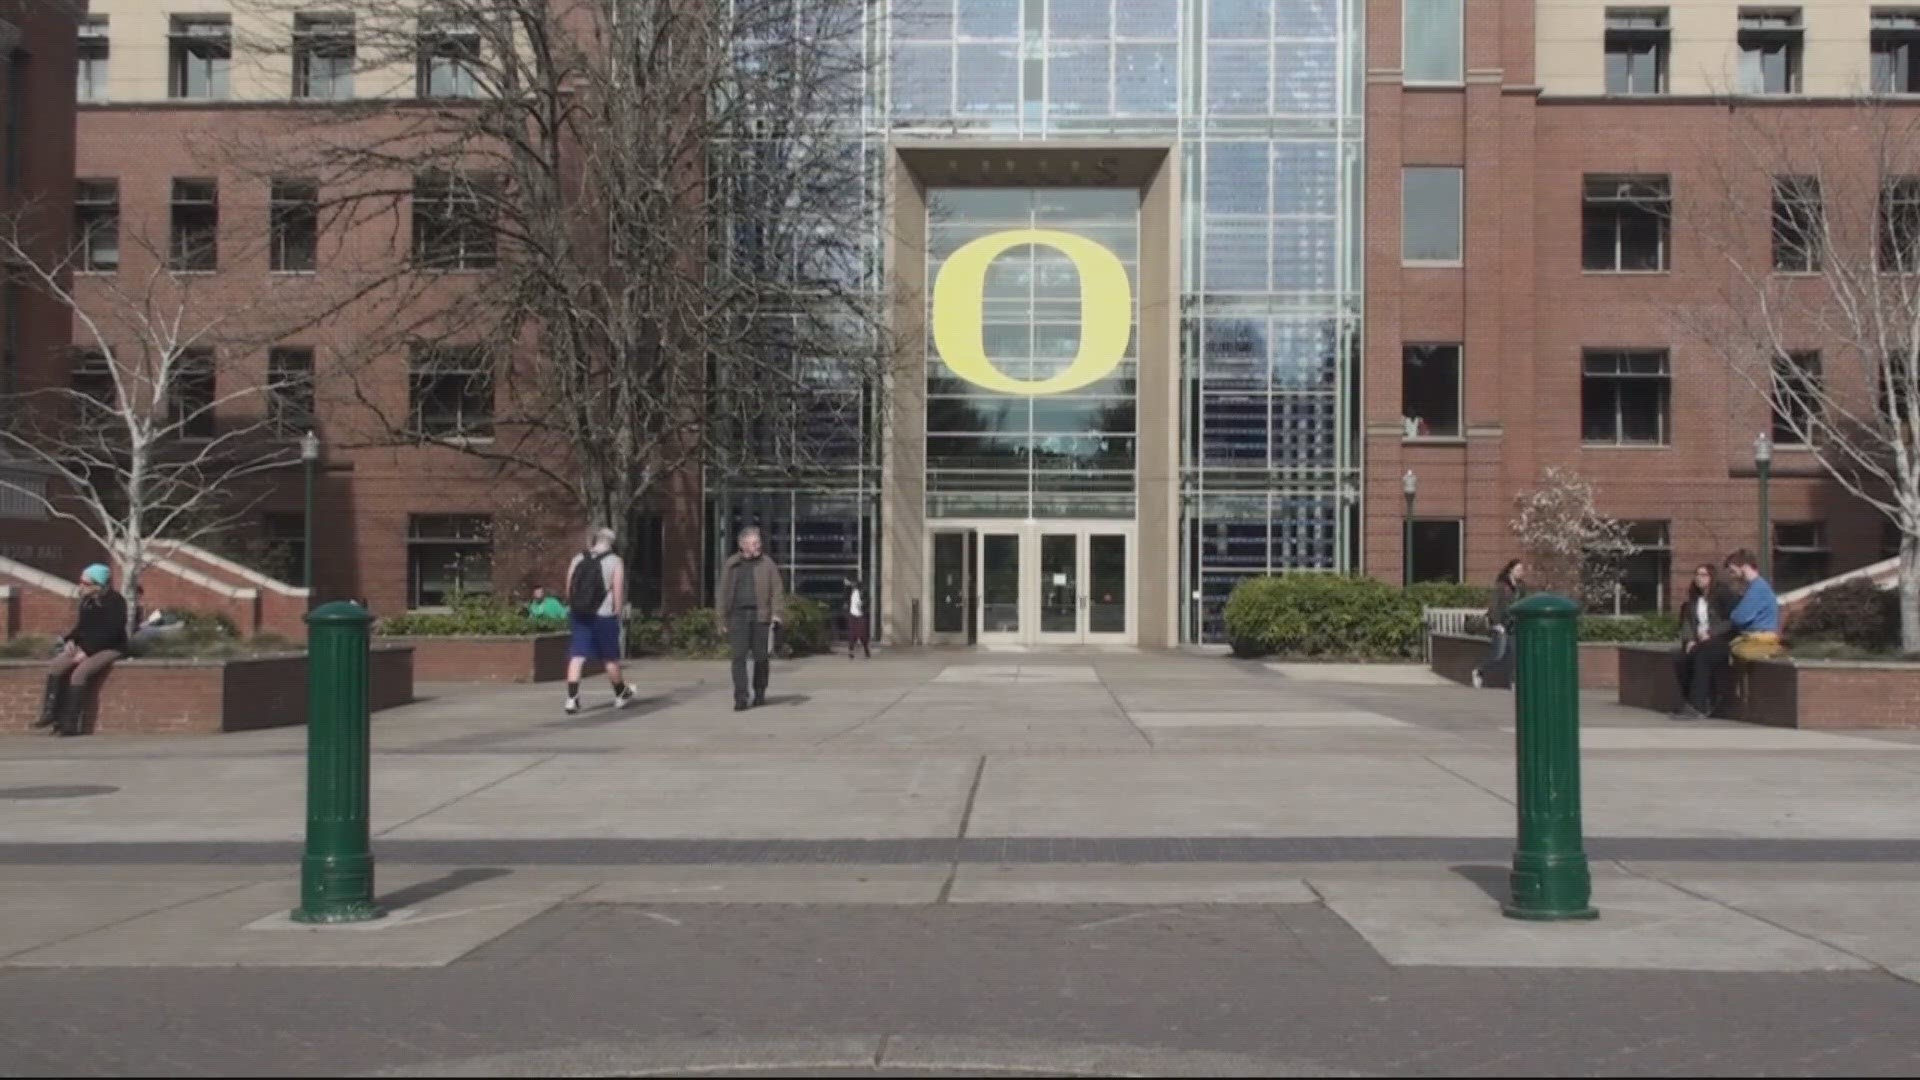 After the problematic rollout of the new FAFSA application, the University of Oregon has extended its fall enrollment deadline to June 1.